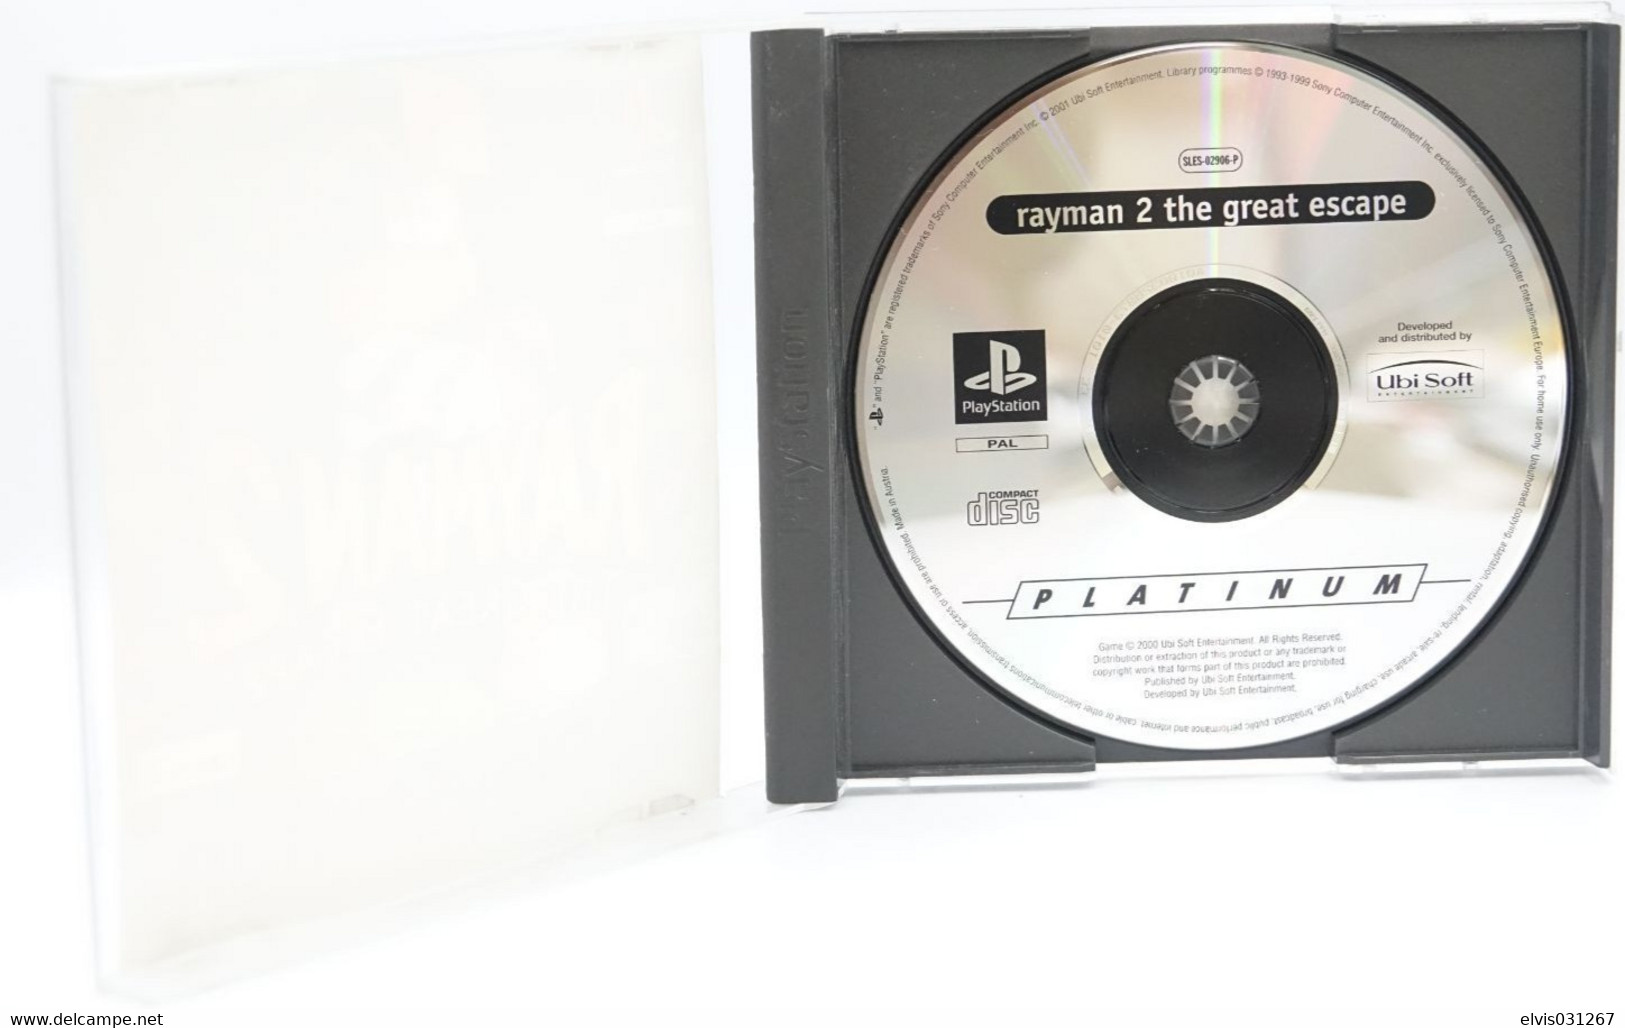 SONY PLAYSTATION ONE PS1 : RAYMAN 2 THE GREAT ESCAPE - PLATINUM - Playstation